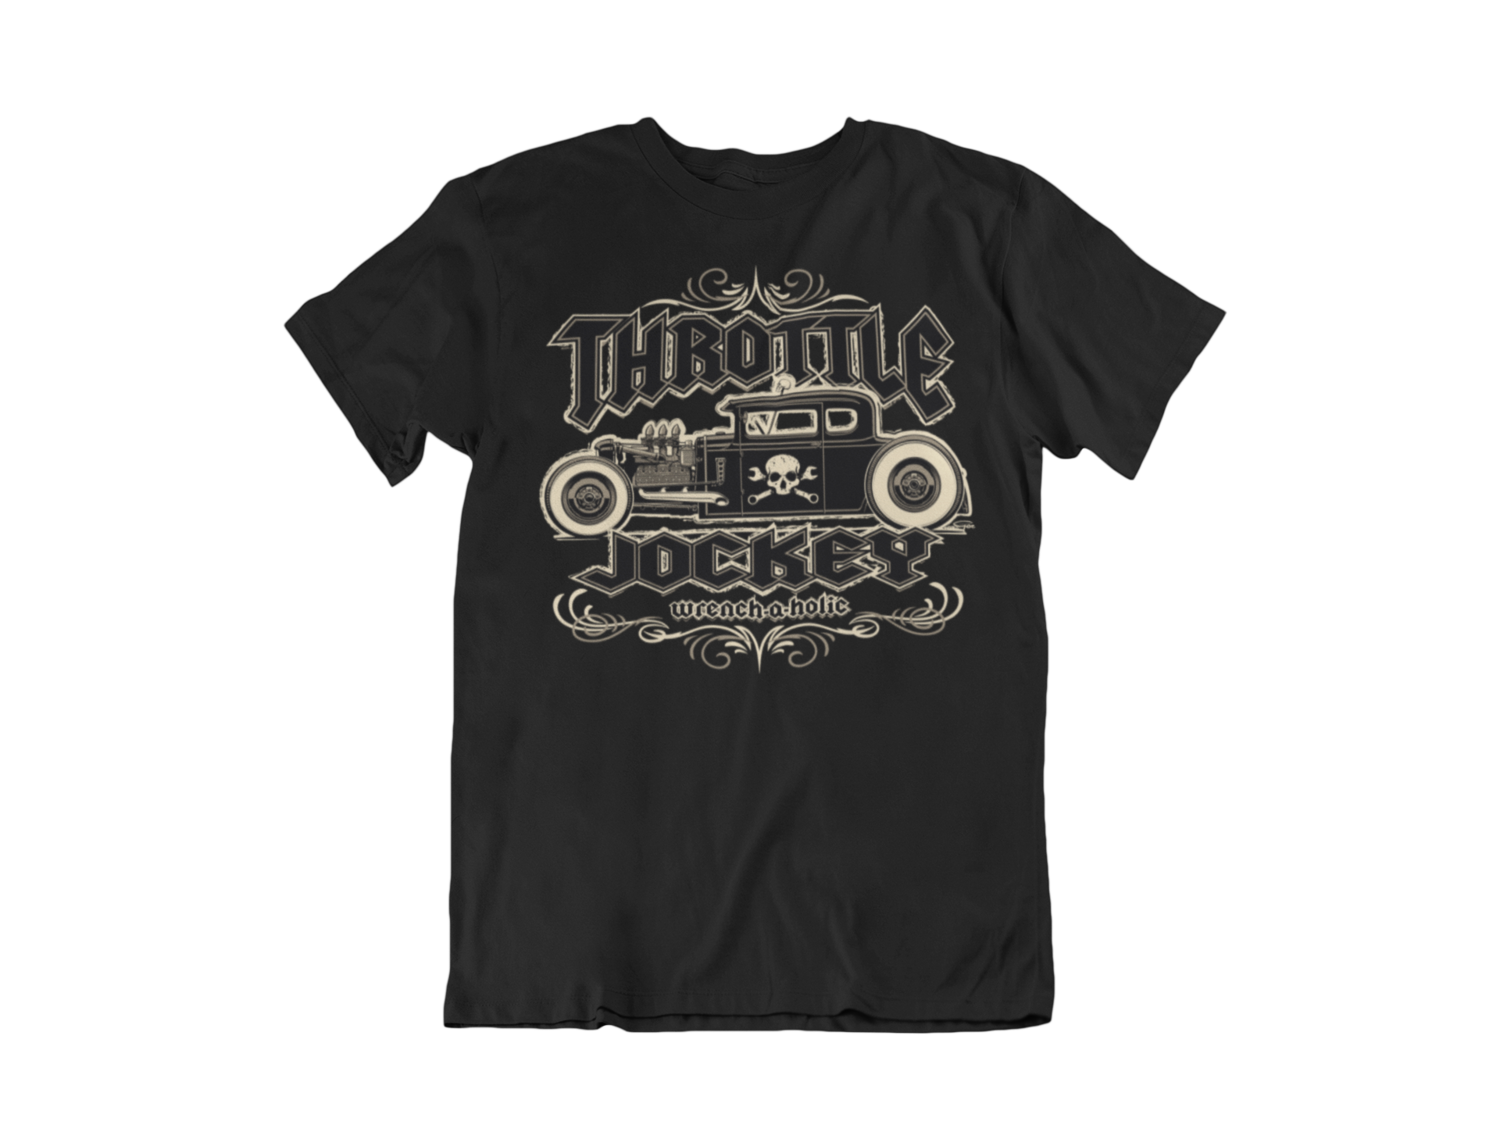 THROTTLE JOCKEY "Wrench a Holic" T-SHIRT MAN BY Ger "Dutch Courage" Peters artwork